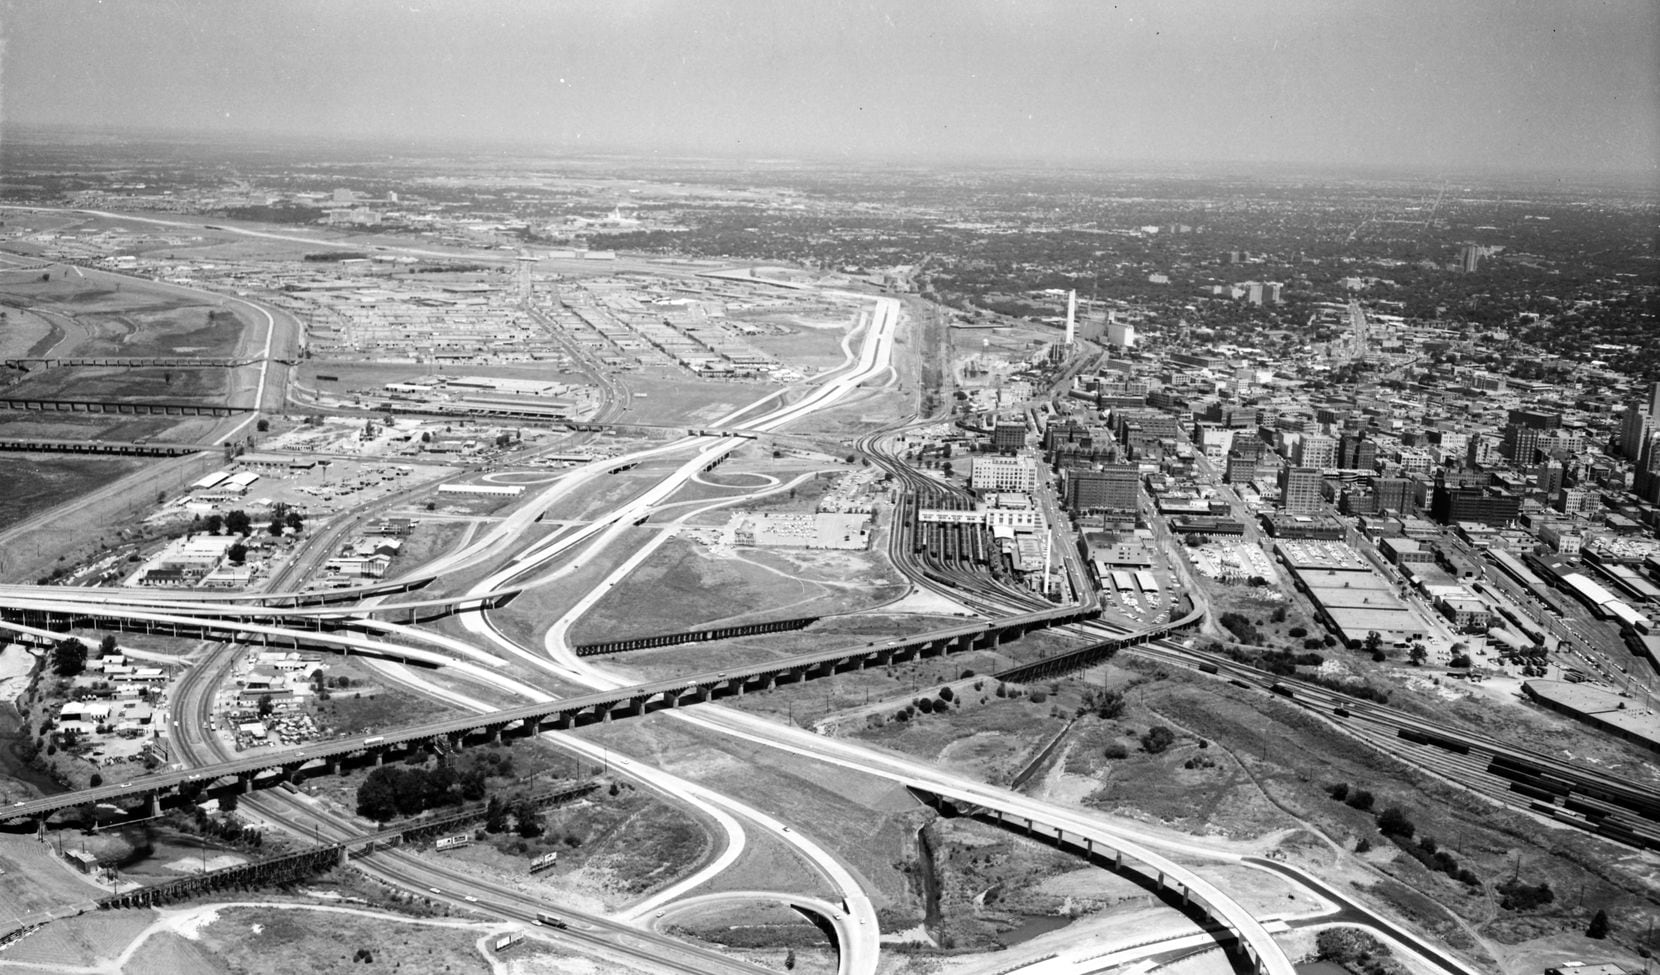 Construction of Stemmons Freeway, which started in the 1950s, sent office development...